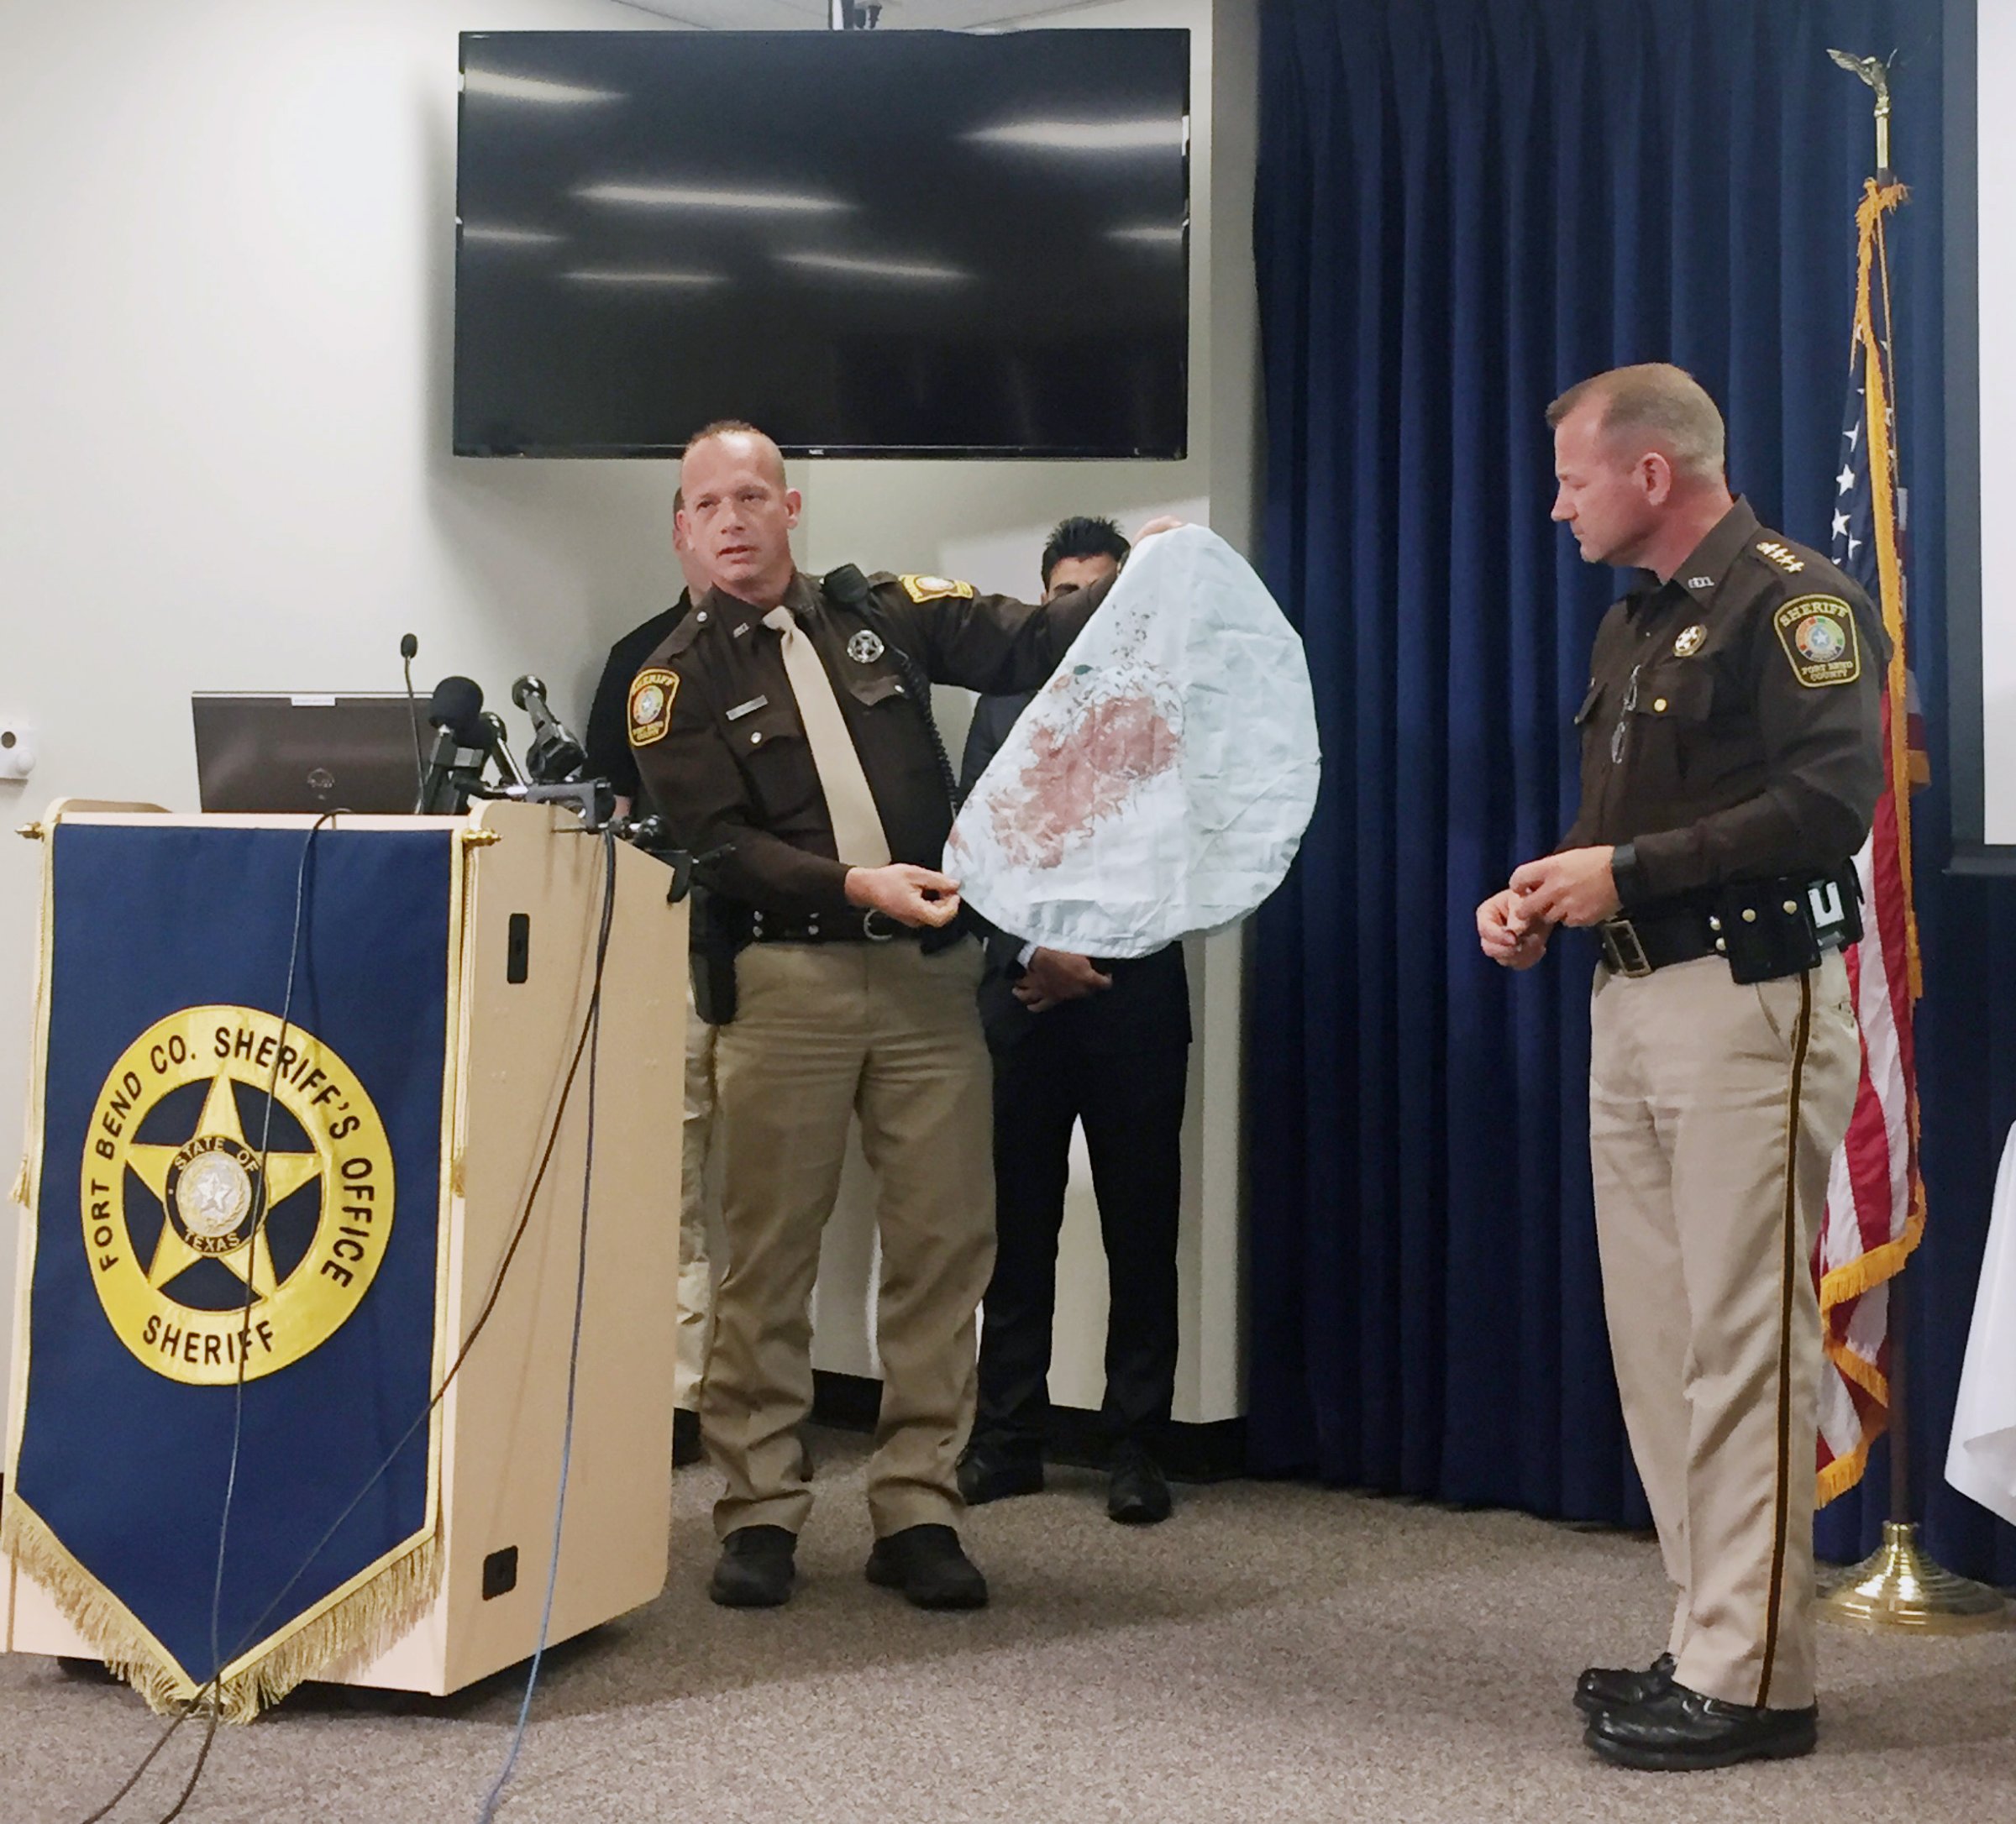 Deputy Danny Beckworth displays part of a defective airbag believed to have killed 17-year-old Huma Hanif during a news conference in Houston on April 7, 2016.